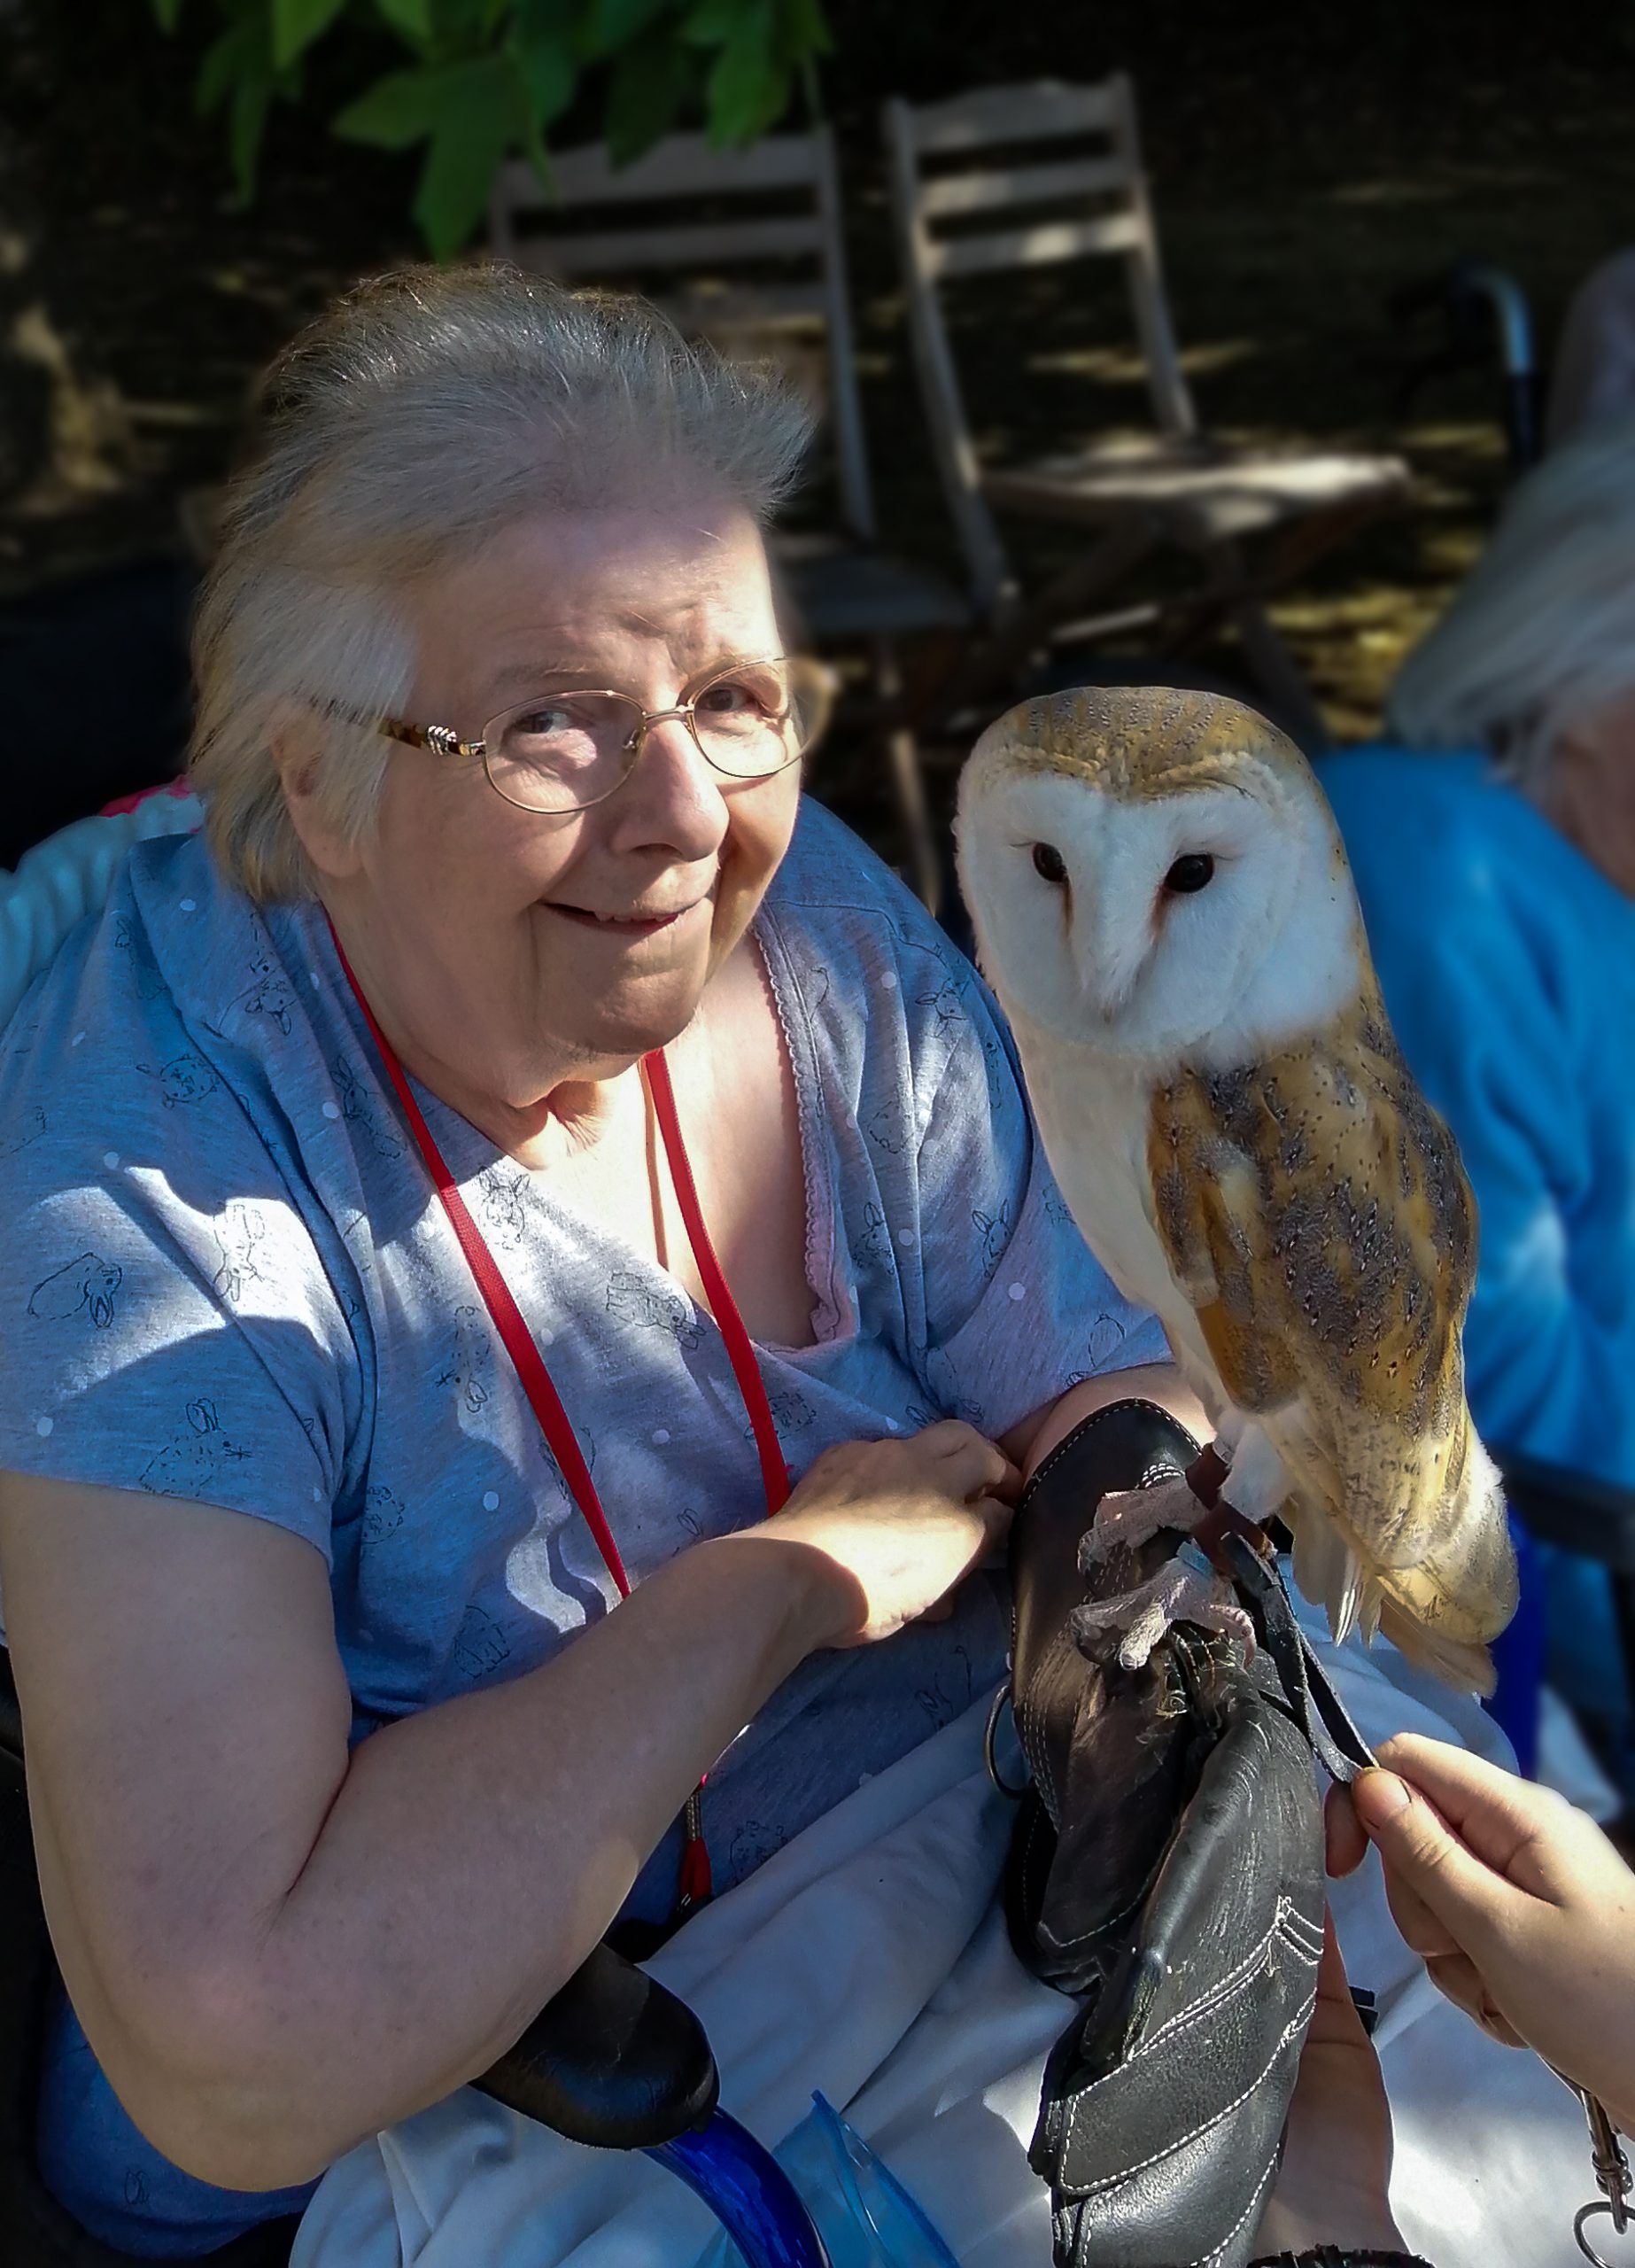 RNNH Resident with an Owl from Creature Teachers on her arm